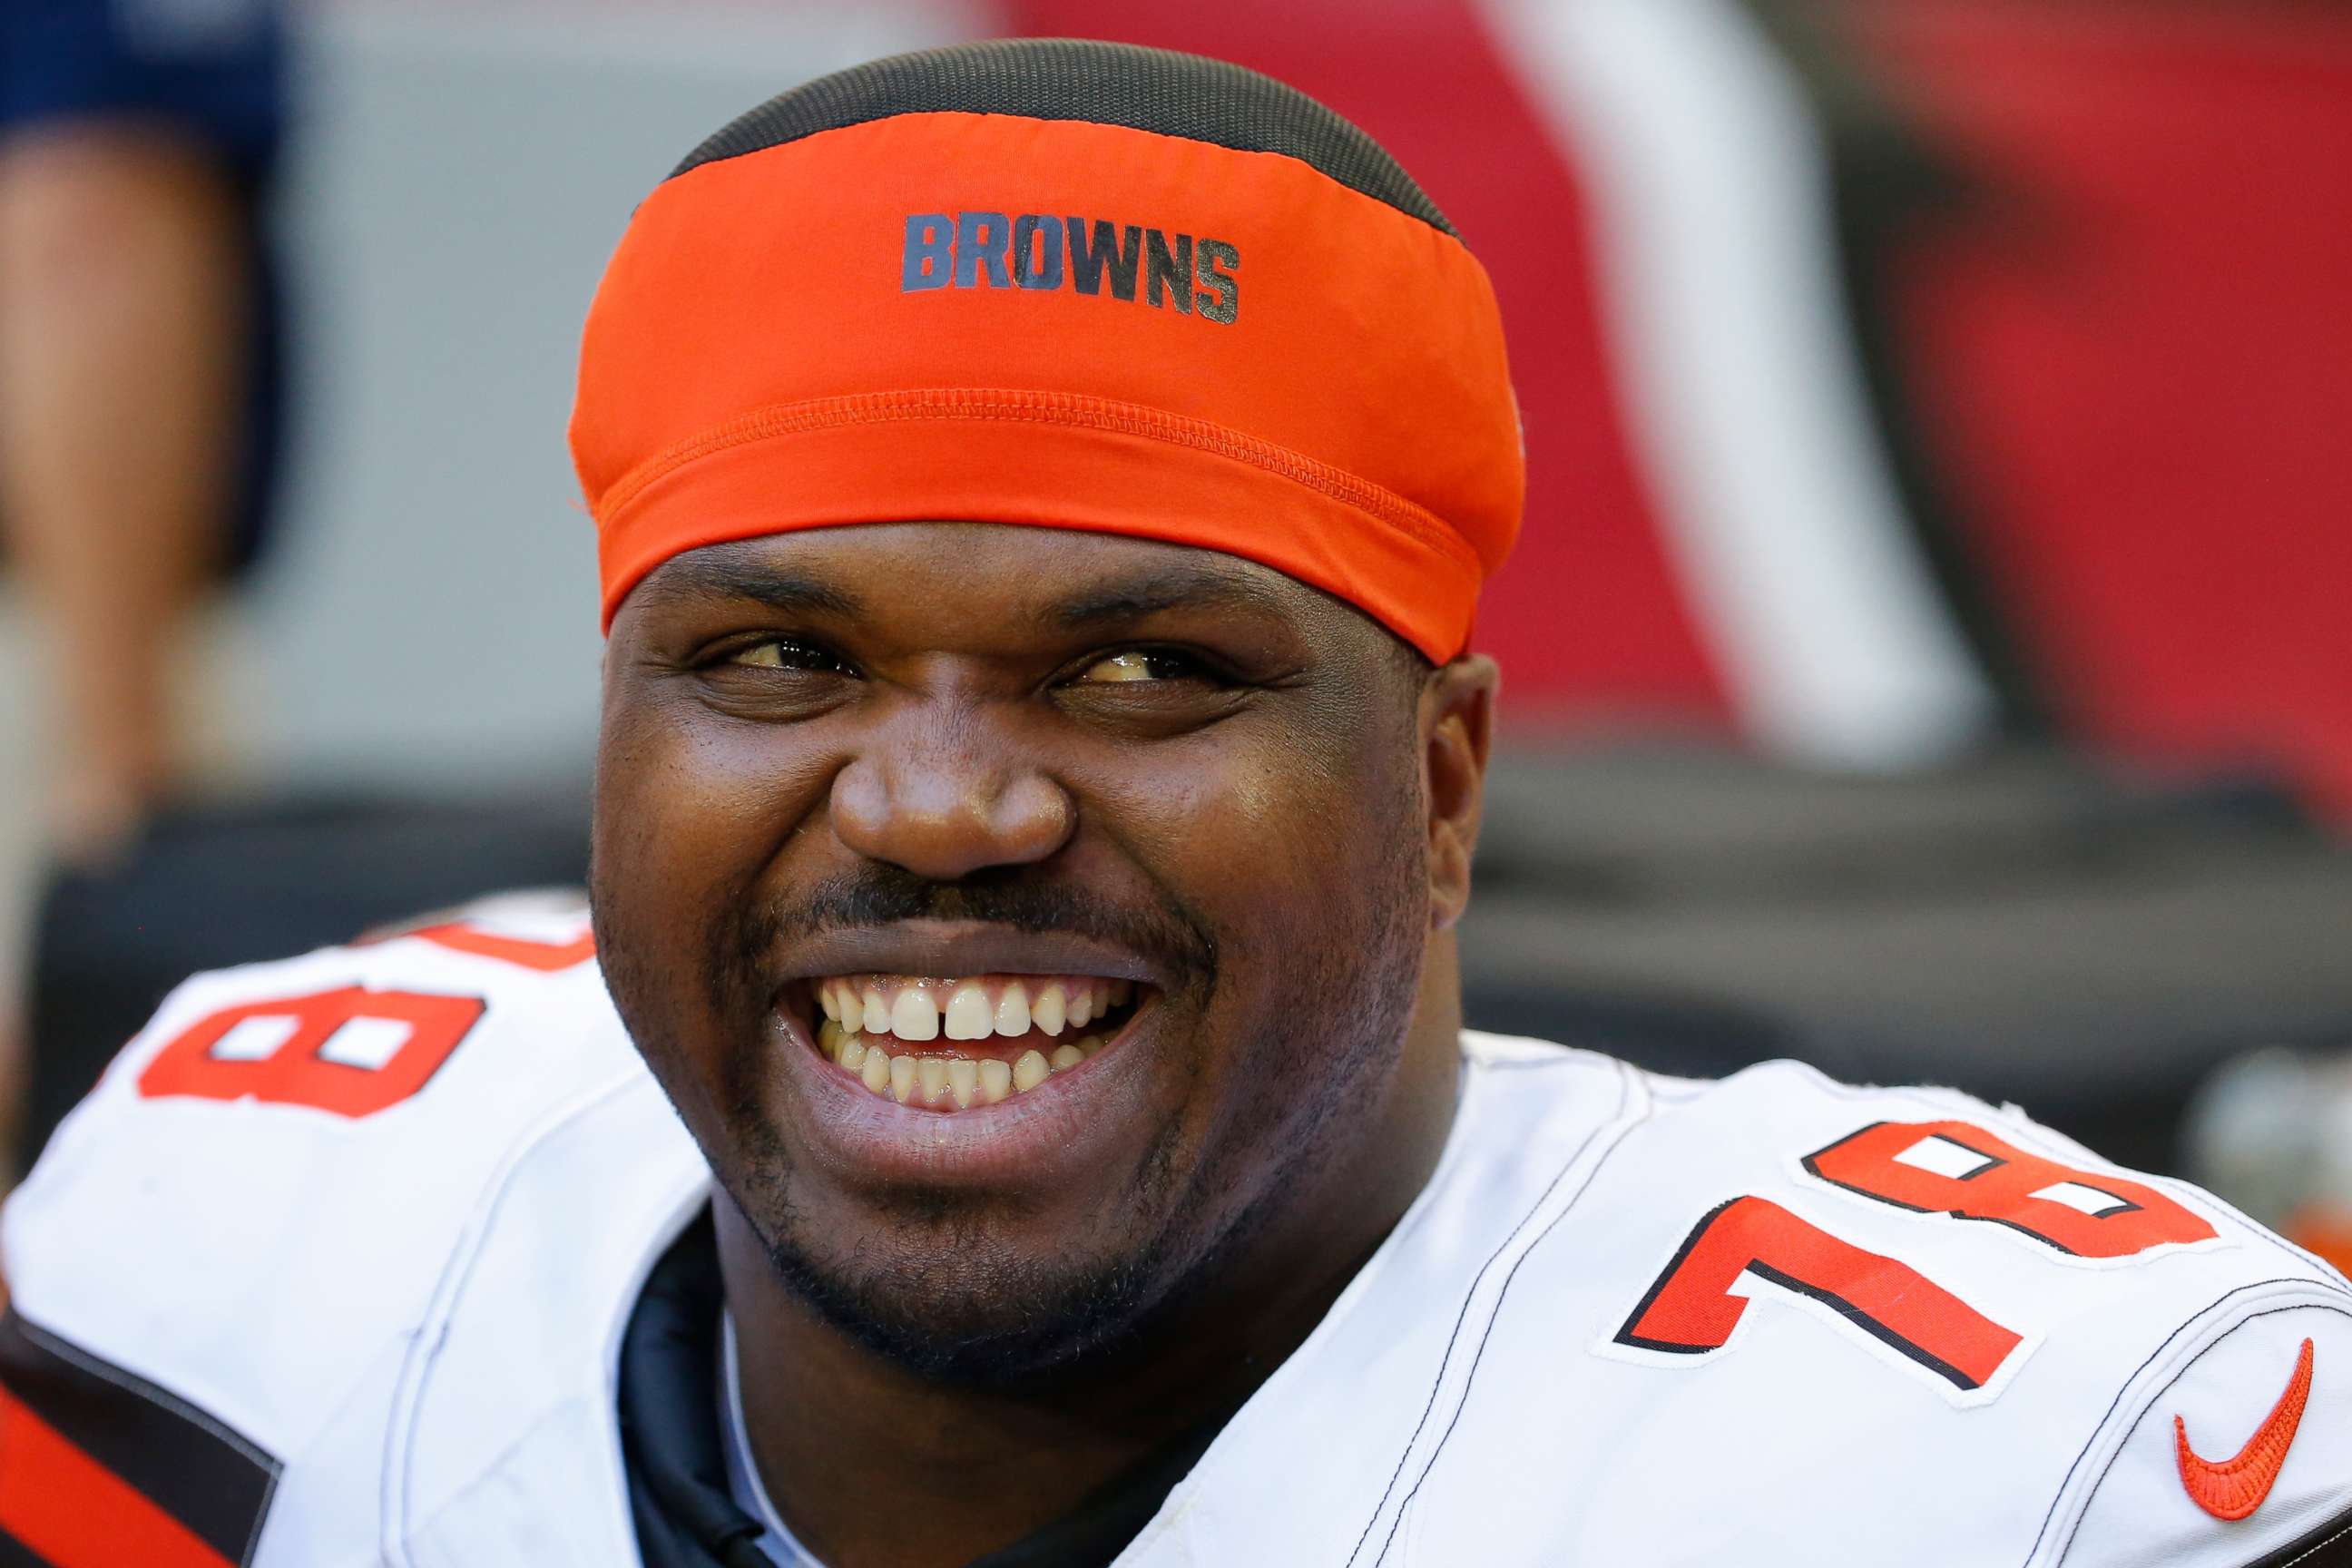 PHOTO: FILE - In this Dec. 15, 2019, file photo, Cleveland Browns offensive tackle Greg Robinson smiles during an NFL game. Robinson was being held Wednesday, Feb. 19, 2020,  in a Texas jail on a pending drug distribution charge from a federal agency.